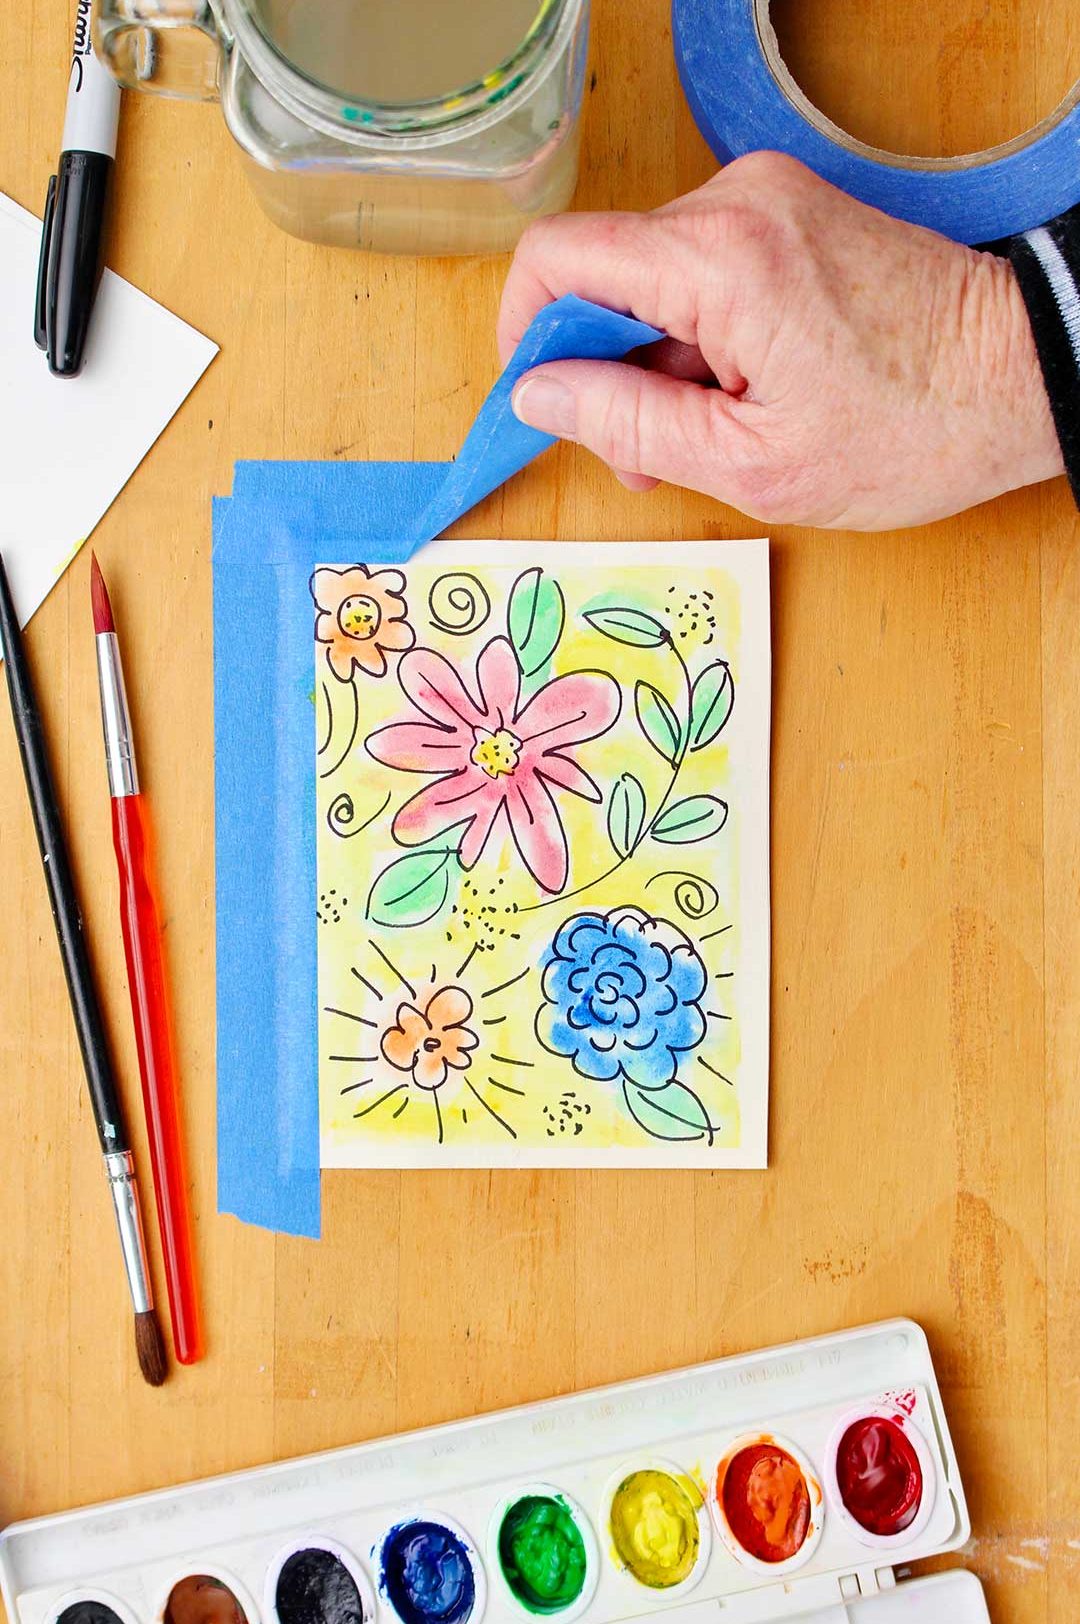 Hand peeling up blue painters tape off wooden table to reveal completed watercolor flower card.